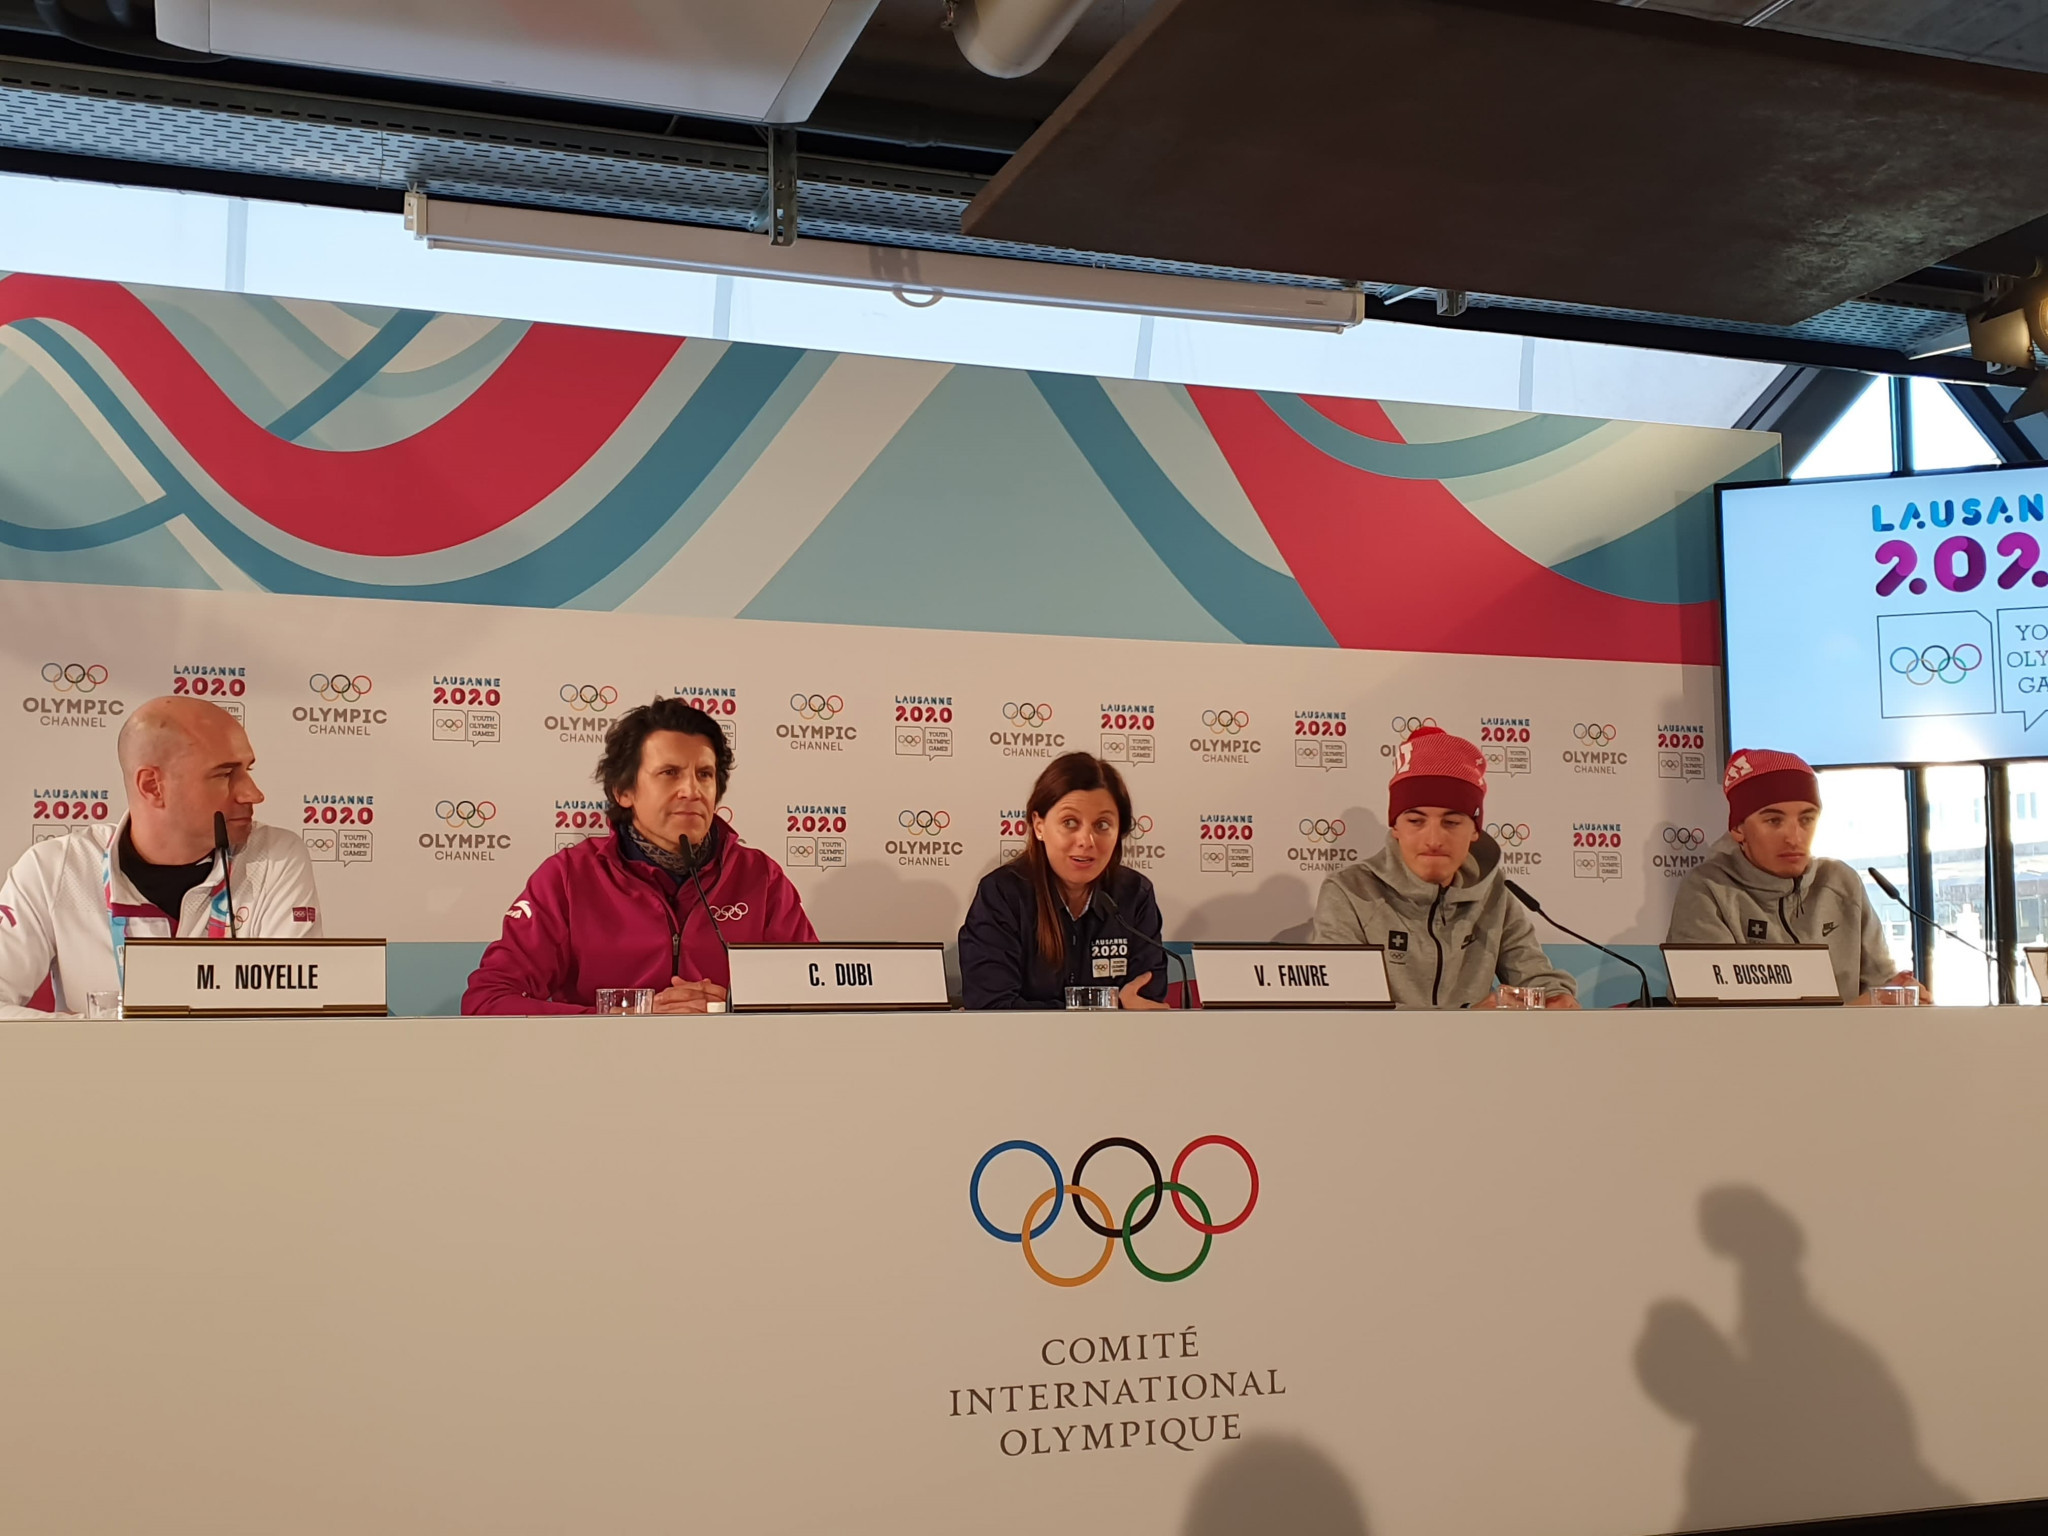 Beijing 2022 encouraged to replicate youth spirit of Winter Youth Olympics